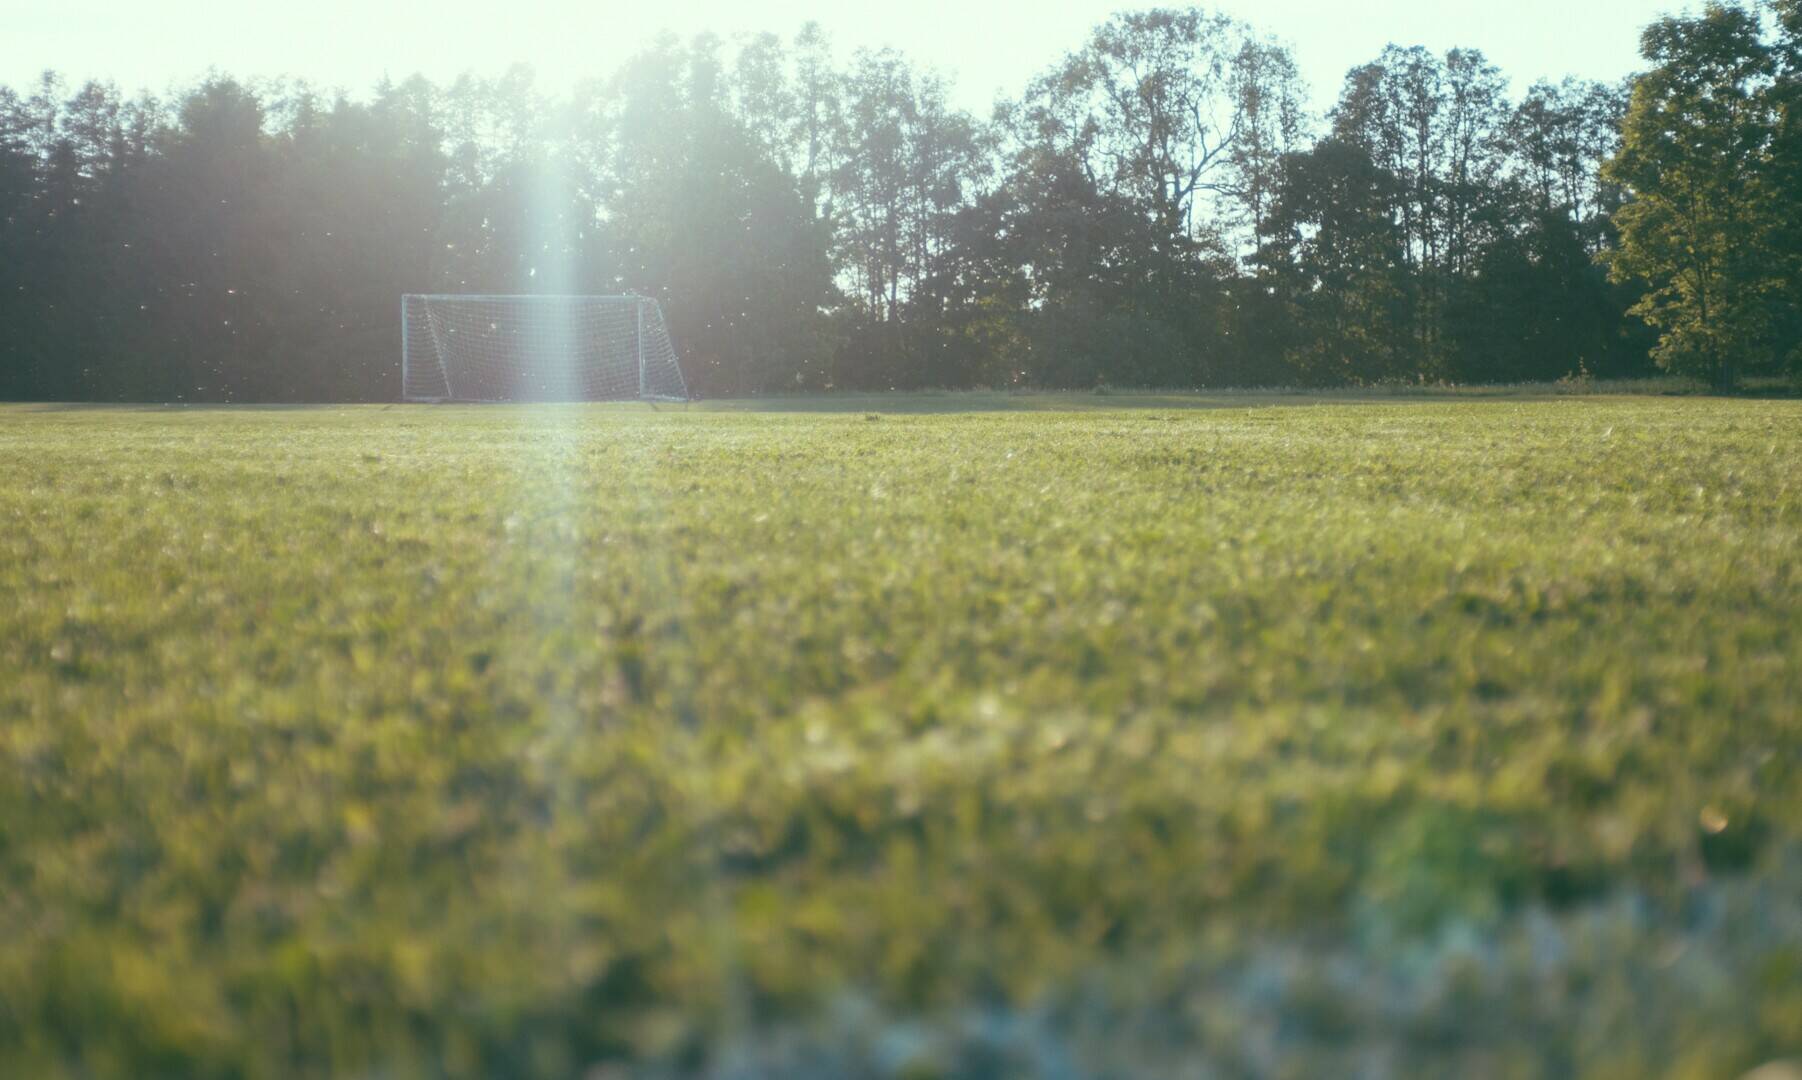 field-with-soccer-goal-near-the-forest.jpg